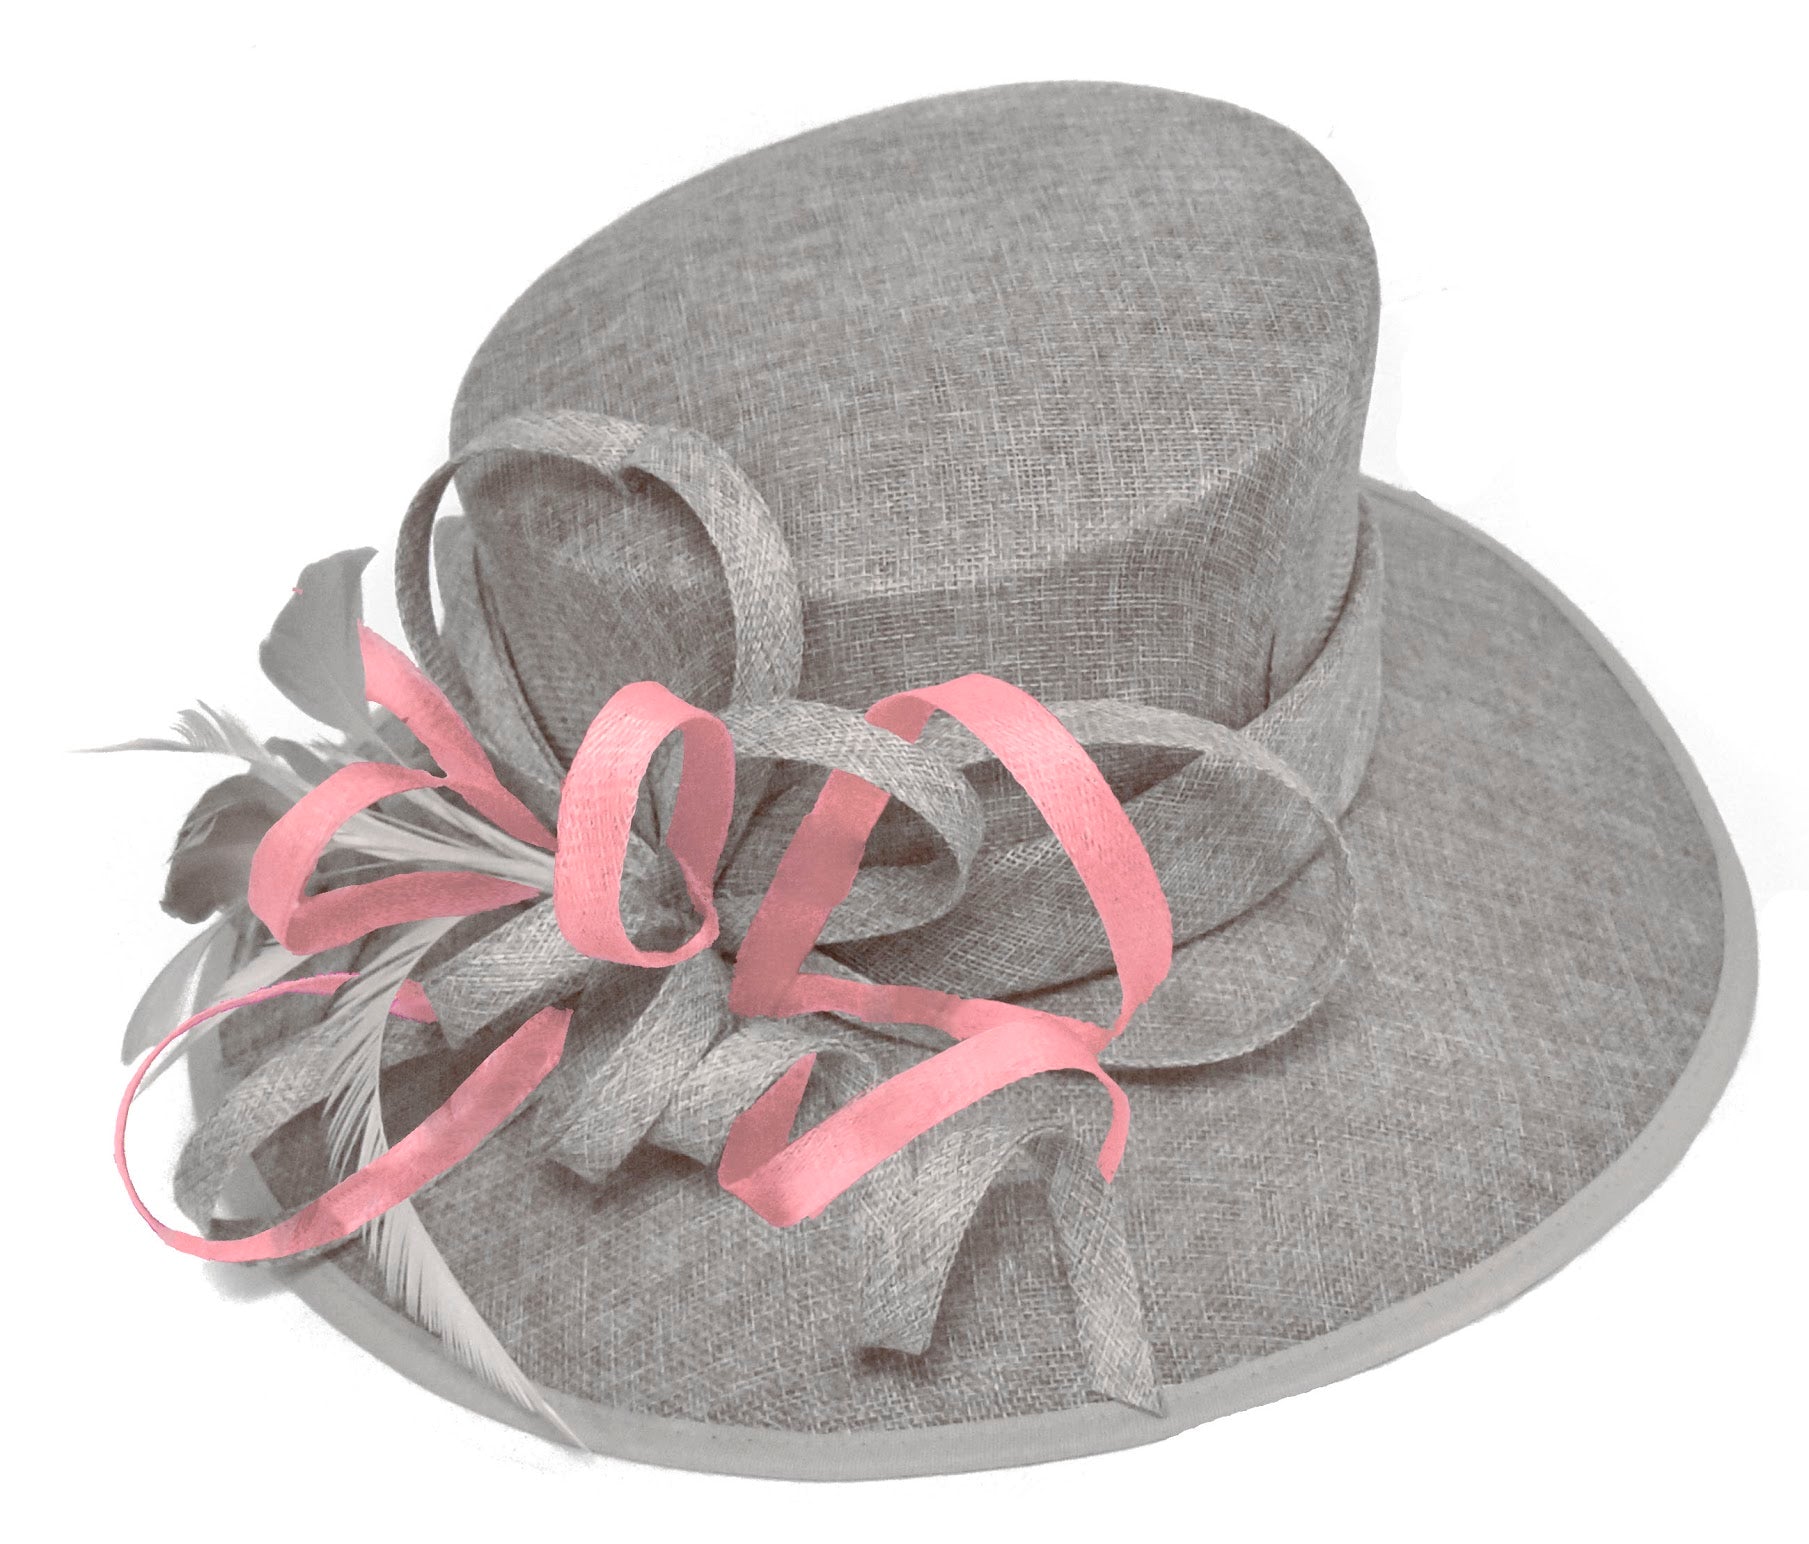 Silver Grey and Baby Pink Large Queen Brim Hat Occasion Hatinator Fascinator Weddings Formal